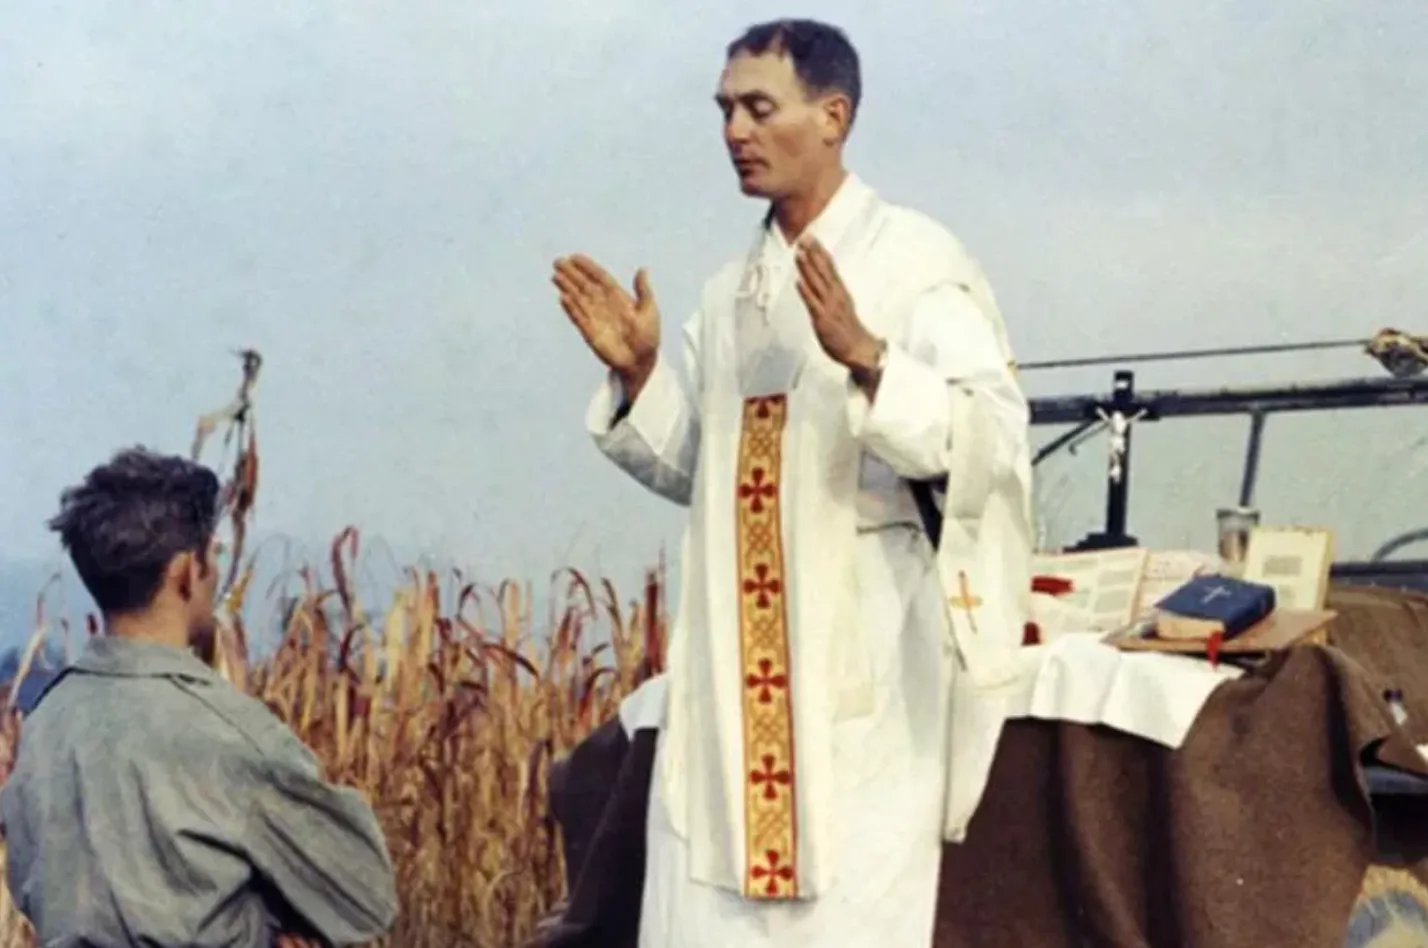 Father Emil Kapaun celebrates Mass using the hood of a Jeep as his altar on Oct. 7, 1950./ Public Domain.